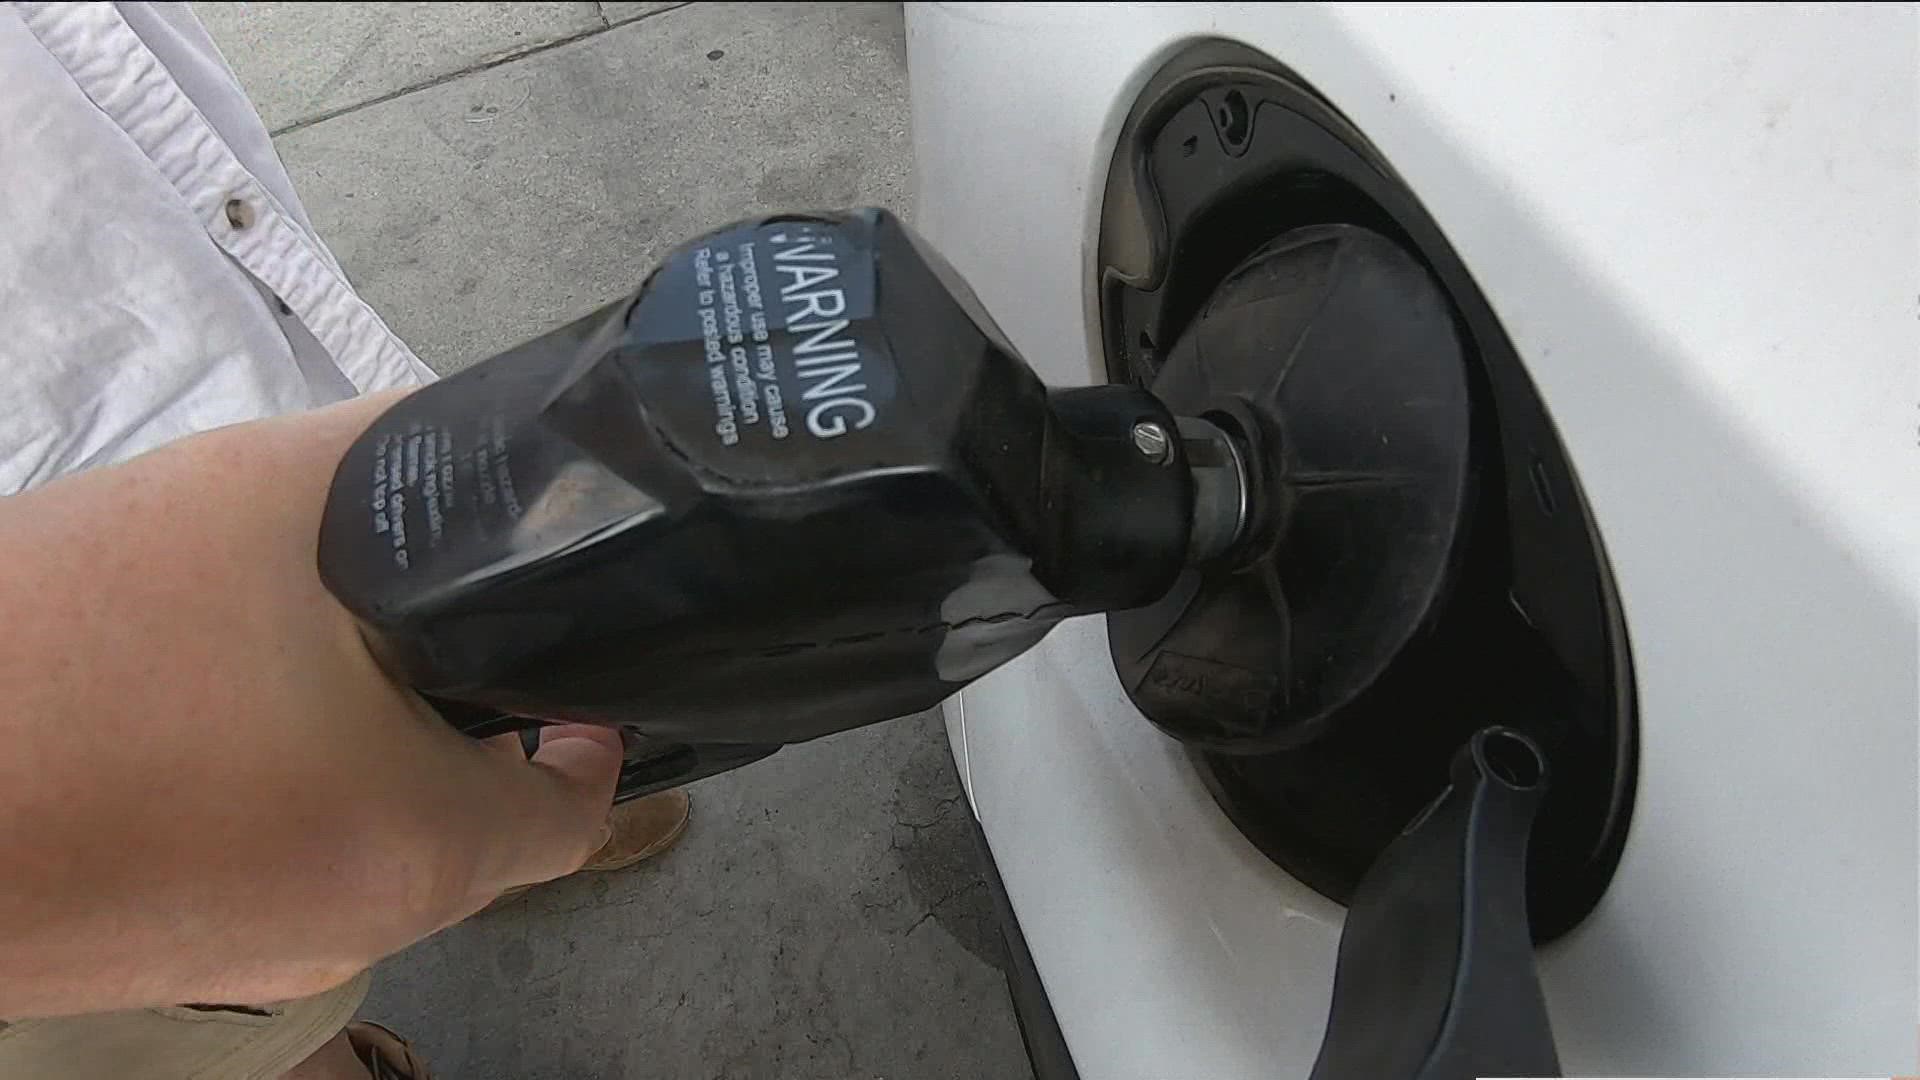 The average cost of gas in Boise has fallen 8.5 cents per gallon in the last week, averaging at $4.77 per gallon, according to a new report from GasBuddy.